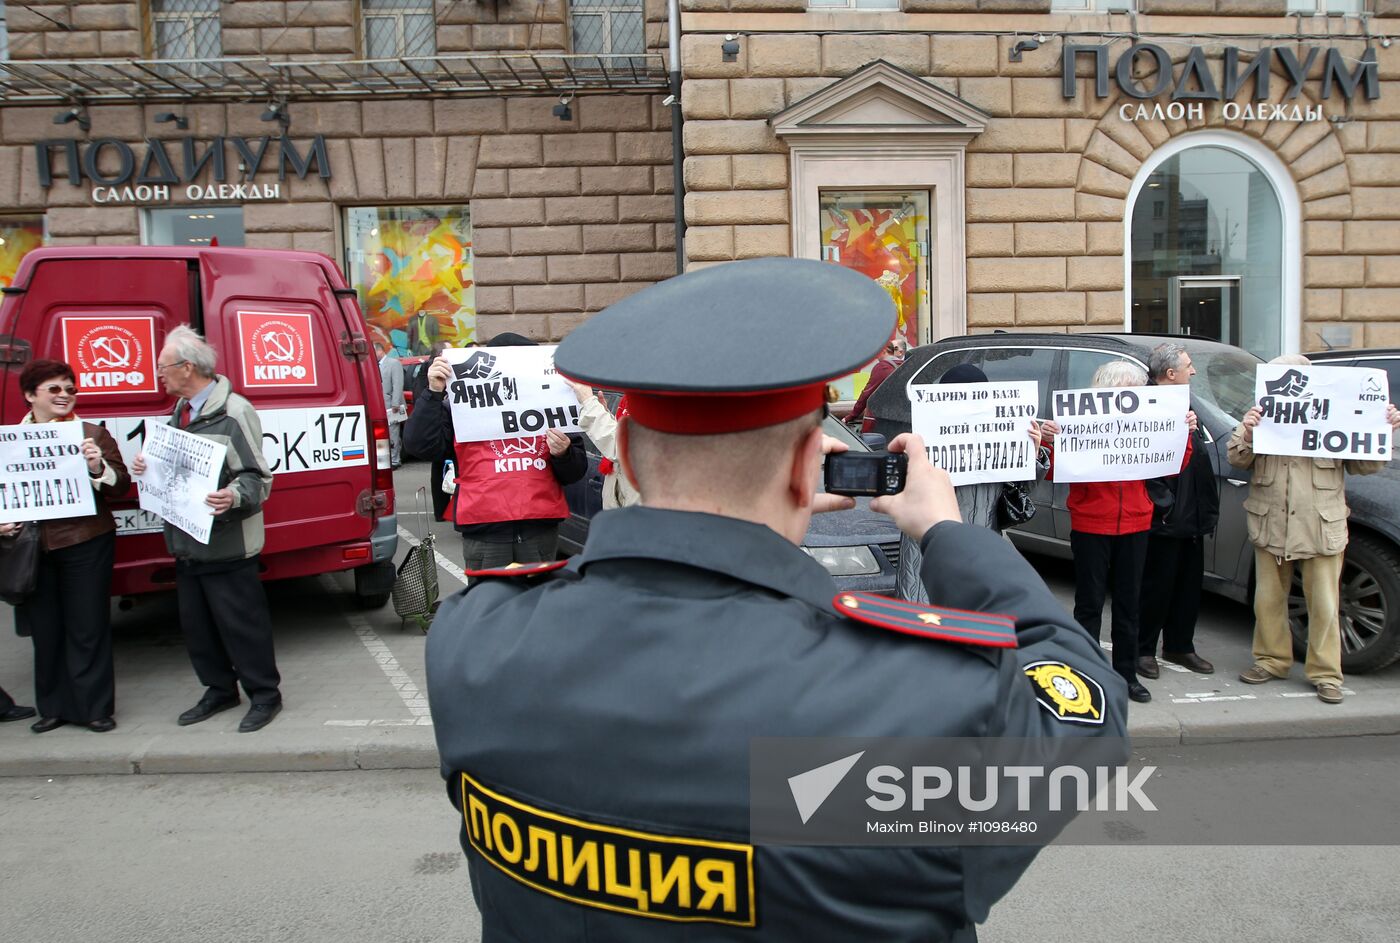 Communist party picket against NATO near U.S. embassy in Moscow